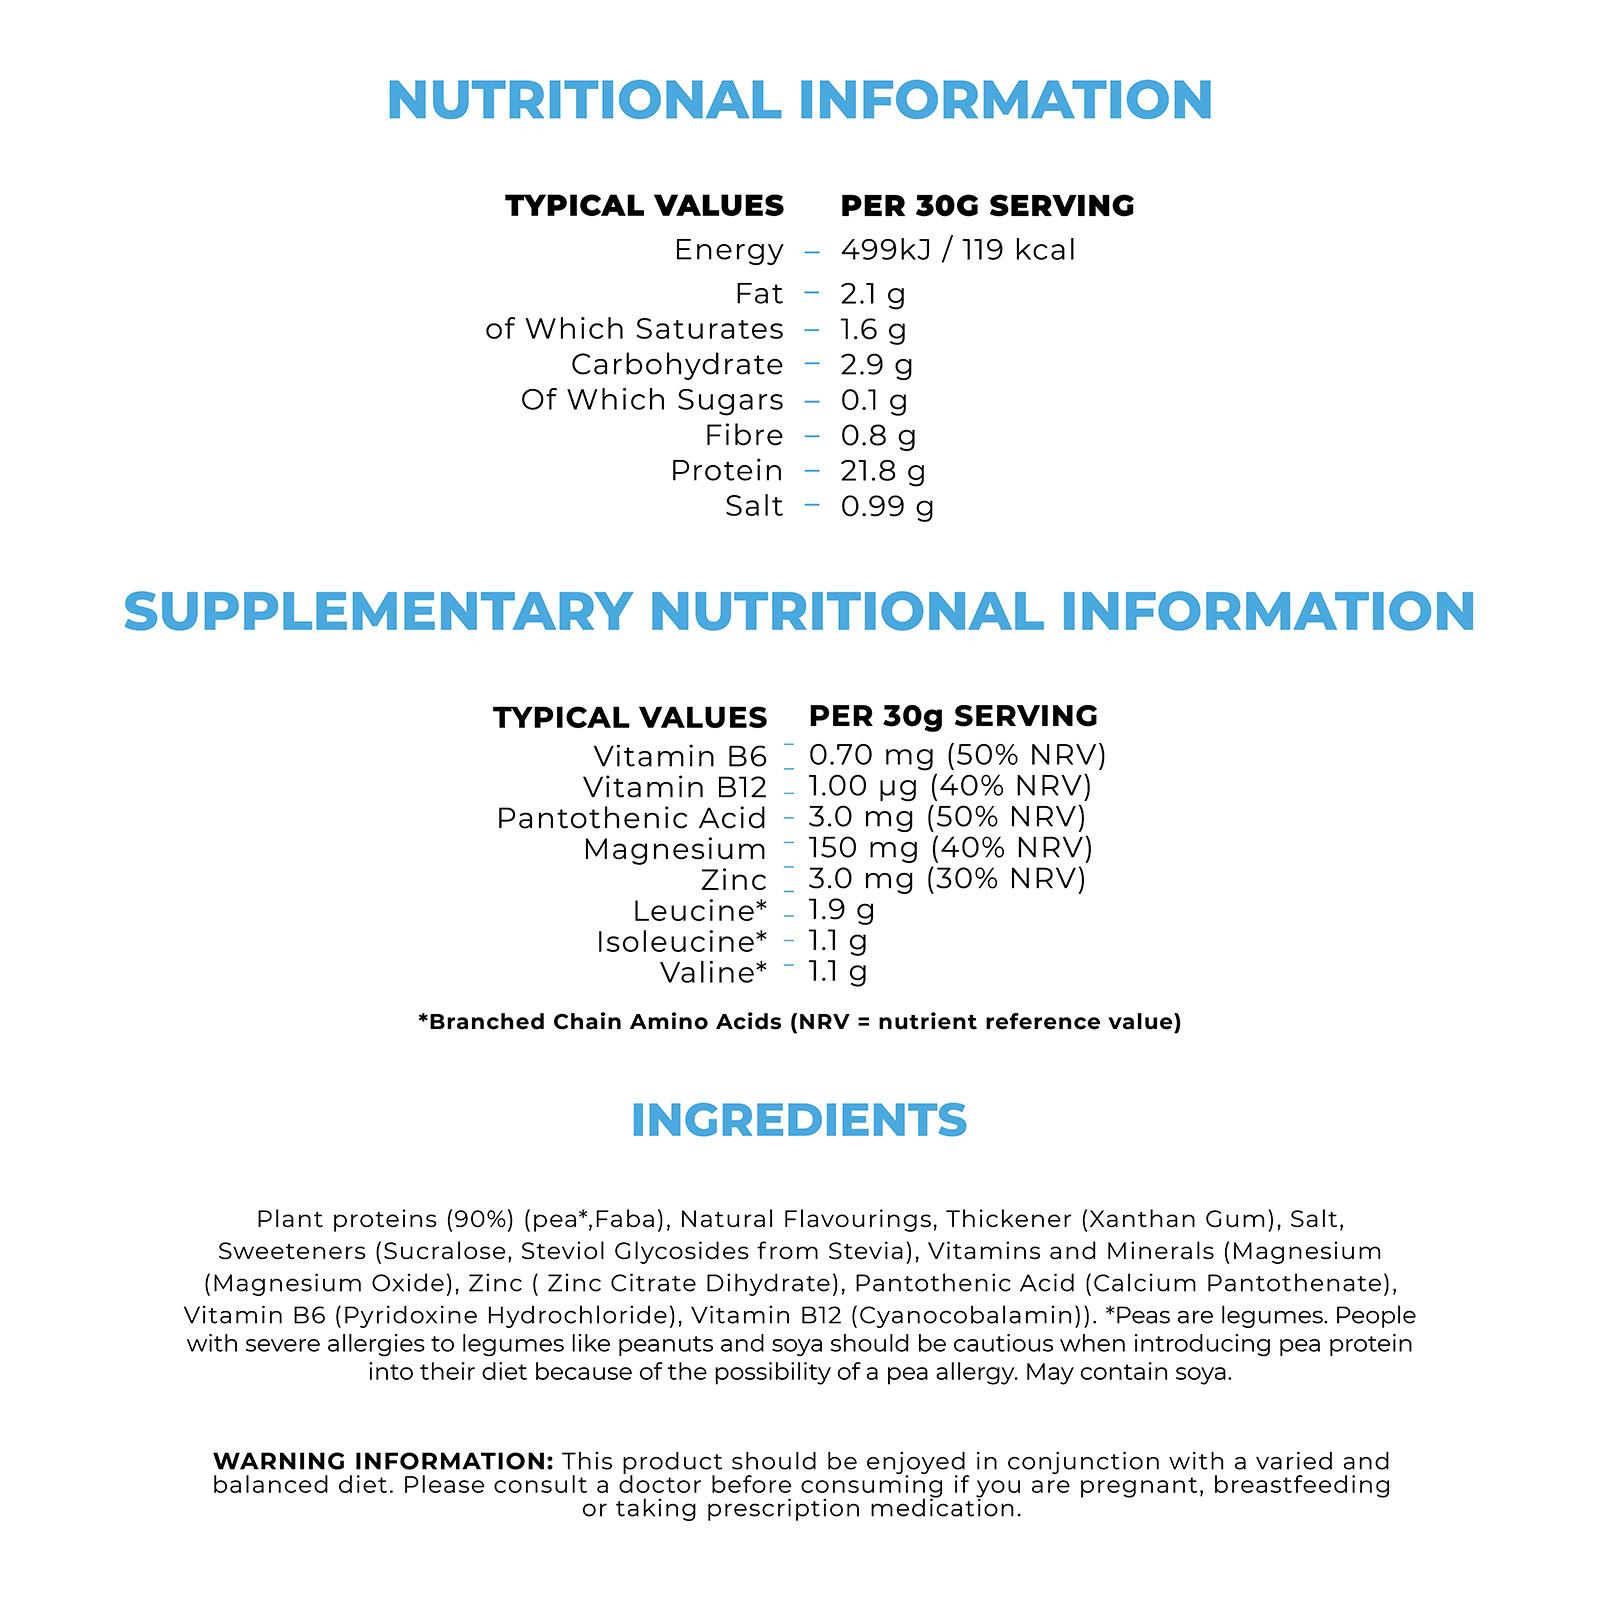 NUTRITIONAL INFORMATION TYPICAL VALUES PER 30G SERVING Energy 499kJ/119 kcal Fat 2.1 g Of Which Sugars - 0.1 g Fibre 0.8 g Protein 21.8 g Salt 0.99 g of Which Saturates Carbohydrate SUPPLEMENTARY NUTRITIONAL INFORMATION TYPICAL VALUES PER 30g SERVING Vitamin B6 0.70 mg (50% NRV)Vitamin B12 - 1.00 µg (40% NRV) Pantothenic Acid - 3.0 mg (50% NRV) Magnesium 150 mg (40% NRV) Zinc
                          Leucine 3.0 mg (30% NRV) 1.9 g Isoleucine 1.1 g Valine 1.1 g Branched Chain Amino Acids (NRV = nutrient reference value) INGREDIENTS
                          Plant proteins (90%) (pea, Faba), Natural Flavourings, Thickener (Xanthan Gum), Salt, Sweeteners (Sucralose, Steviol Glycosides from Stevia), Vitamins and Minerals (Magnesium (Magnesium Oxide), Zinc (Zinc Citrate Dihydrate), Pantothenic Acid (Calcium Pantothenate), Vitamin B6 (Pyridoxine Hydrochloride), Vitamin B12 (Cyanocobalamin)). *Peas are legumes. People with severe allergies to legumes like peanuts and soya should be cautious when introducing pea protein into their diet because of the possibility of a pea allergy. May contain soya. WARNING INFORMATION: This product should be enjoyed in conjunction with a varied and balanced diet. Please consult a doctor before consuming if you are pregnant, breastfeeding or taking prescription medication.